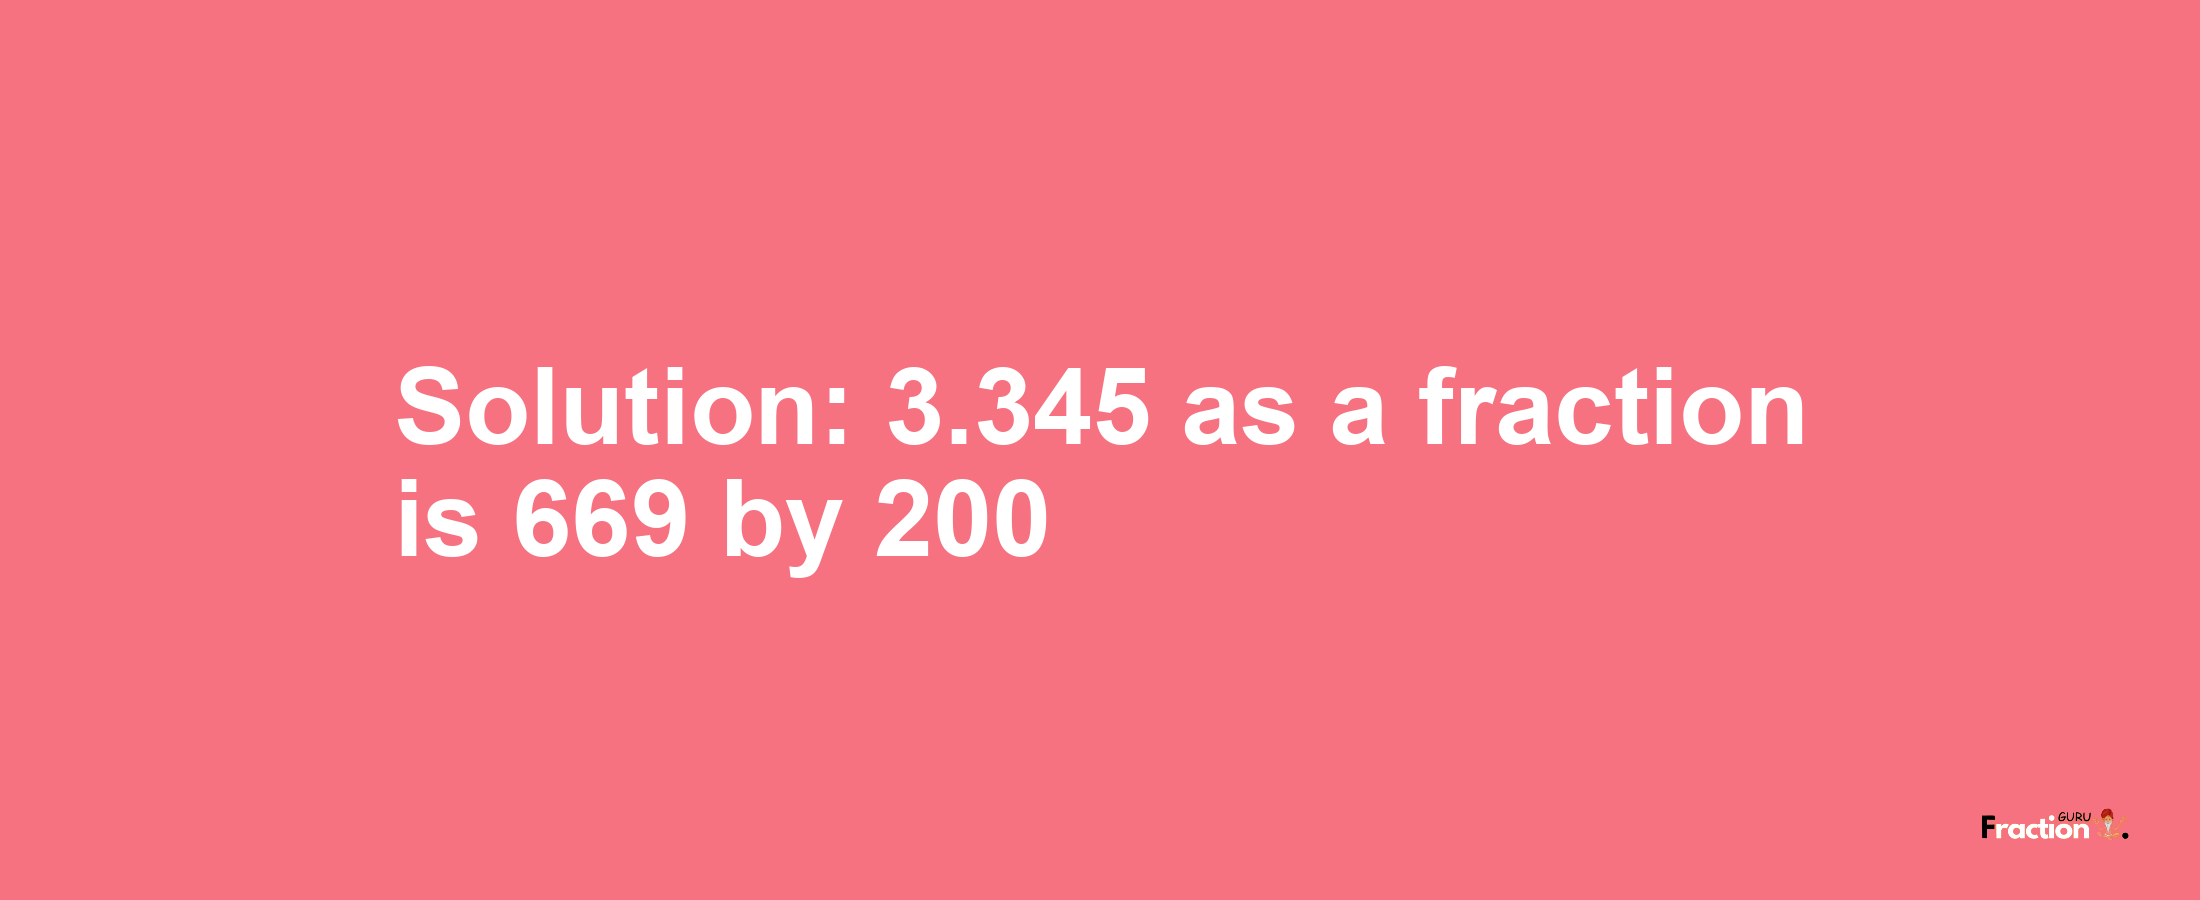 Solution:3.345 as a fraction is 669/200